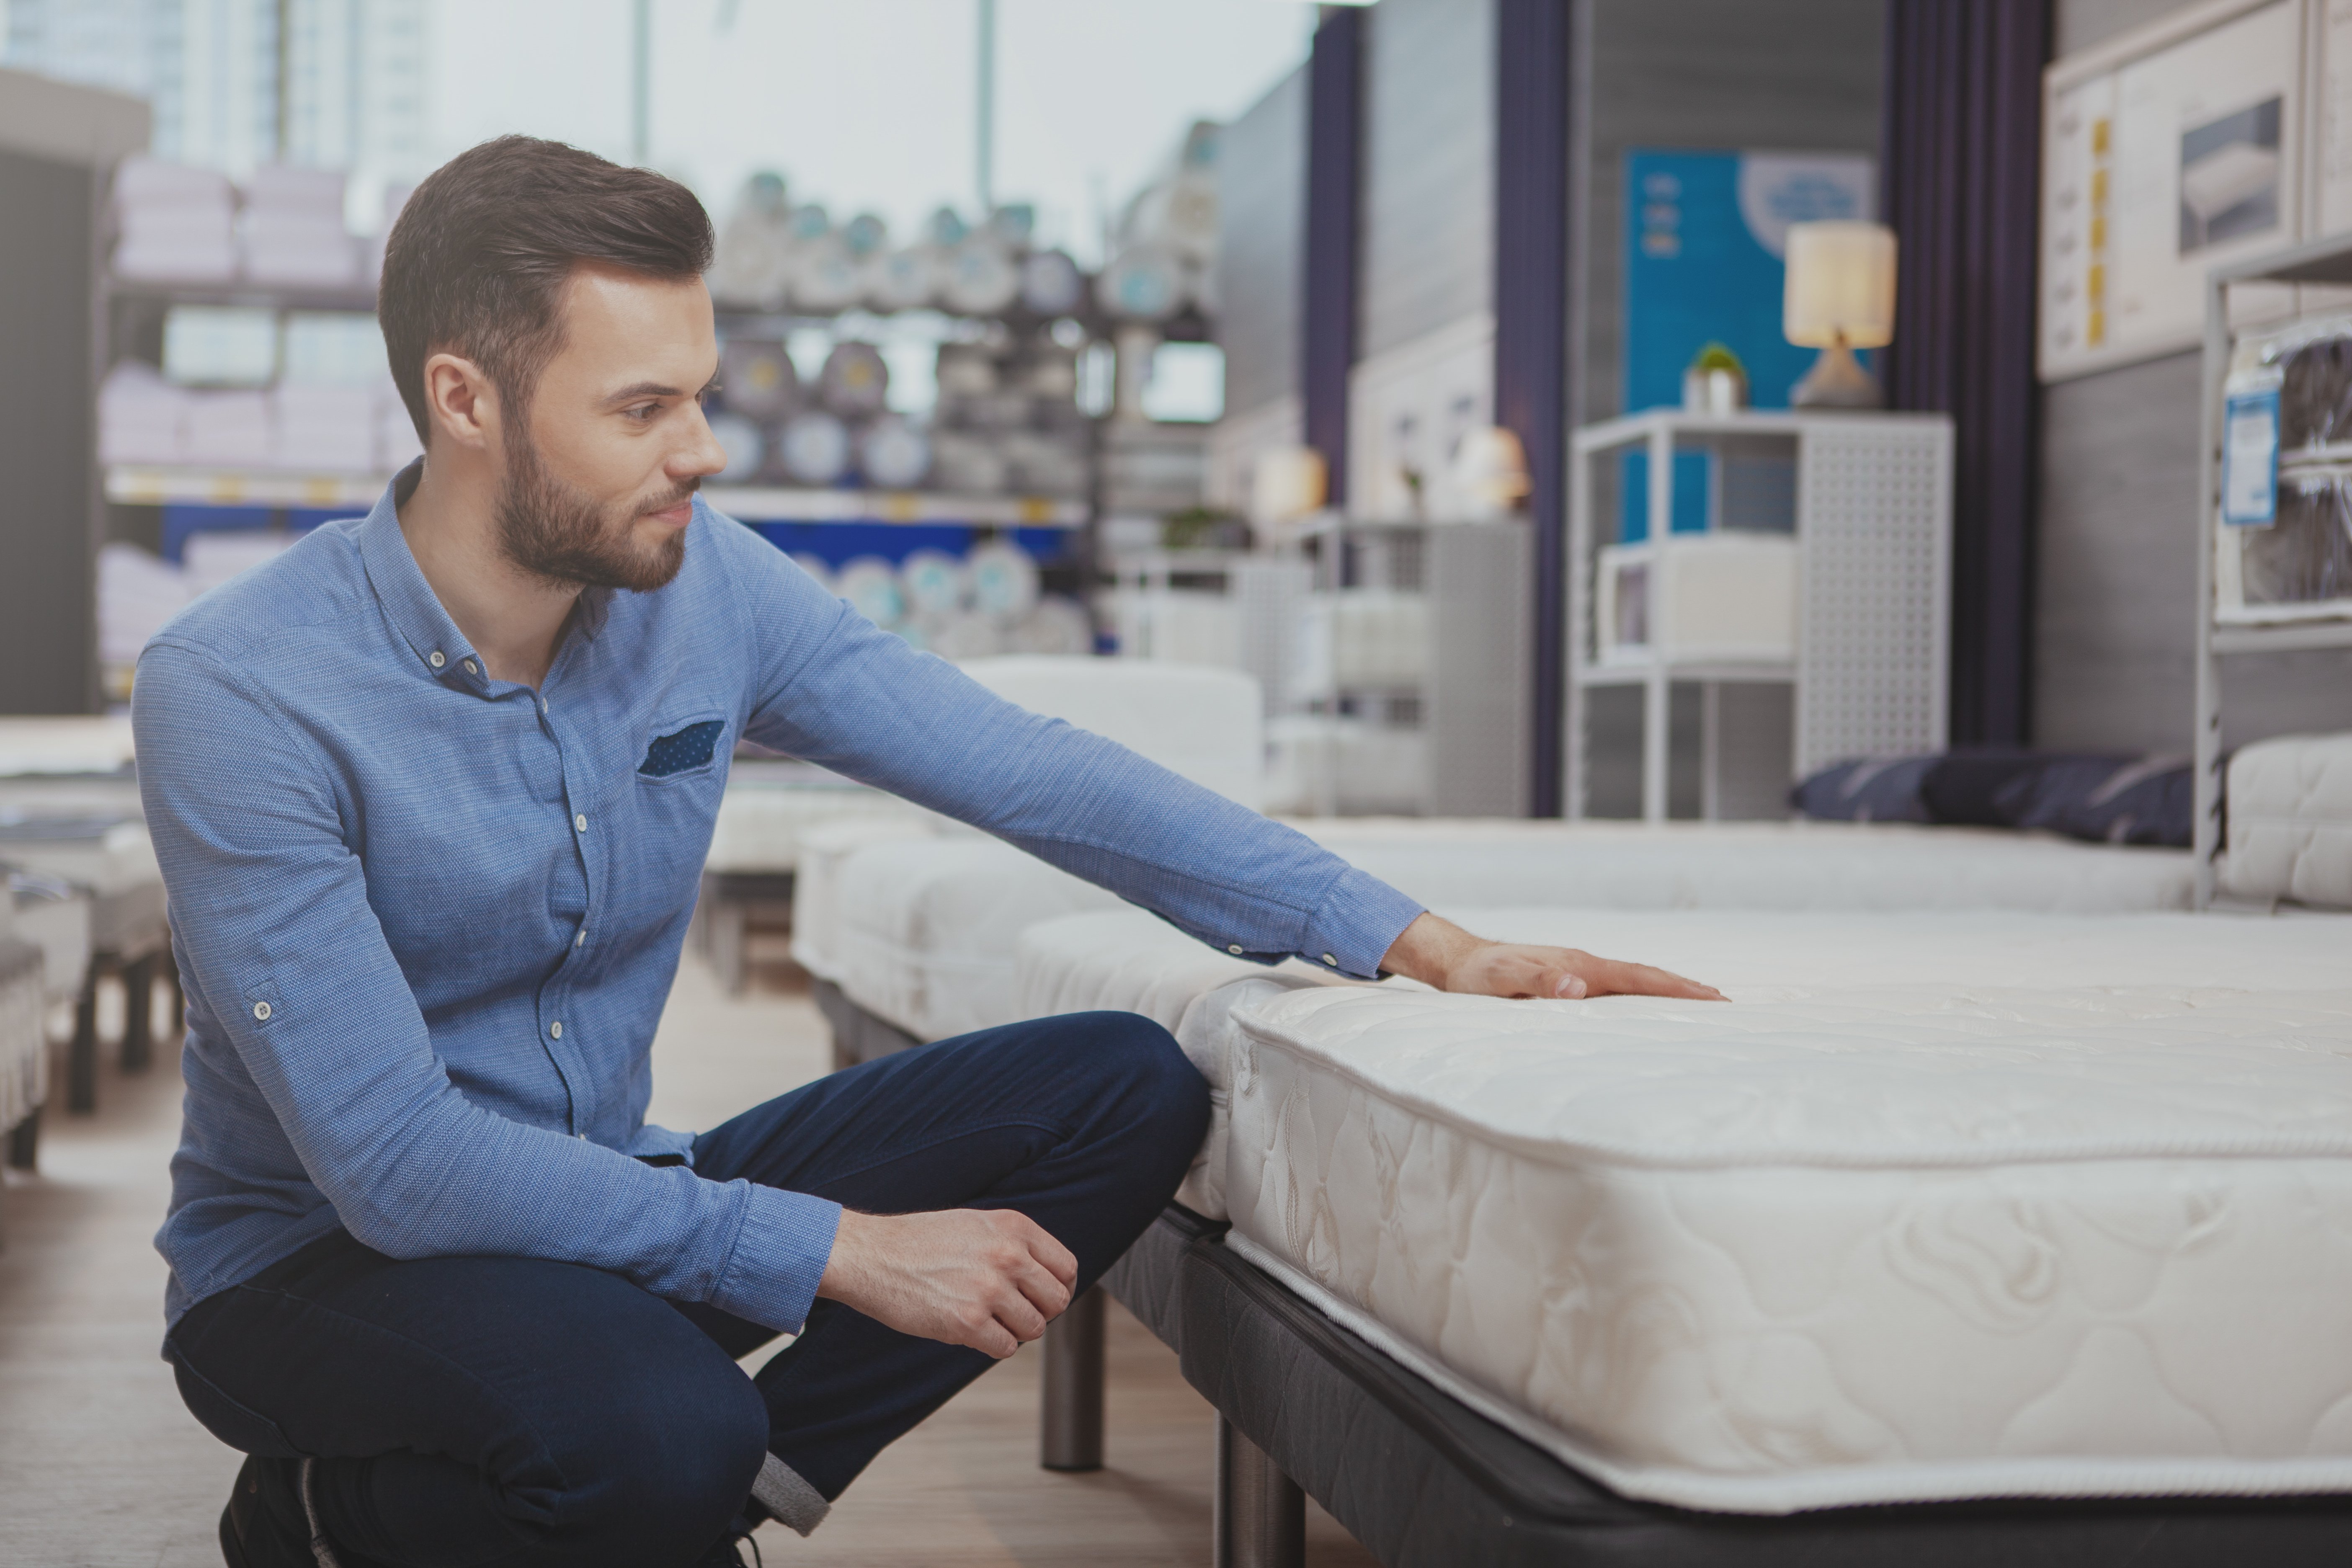 How to find the best mattress for you